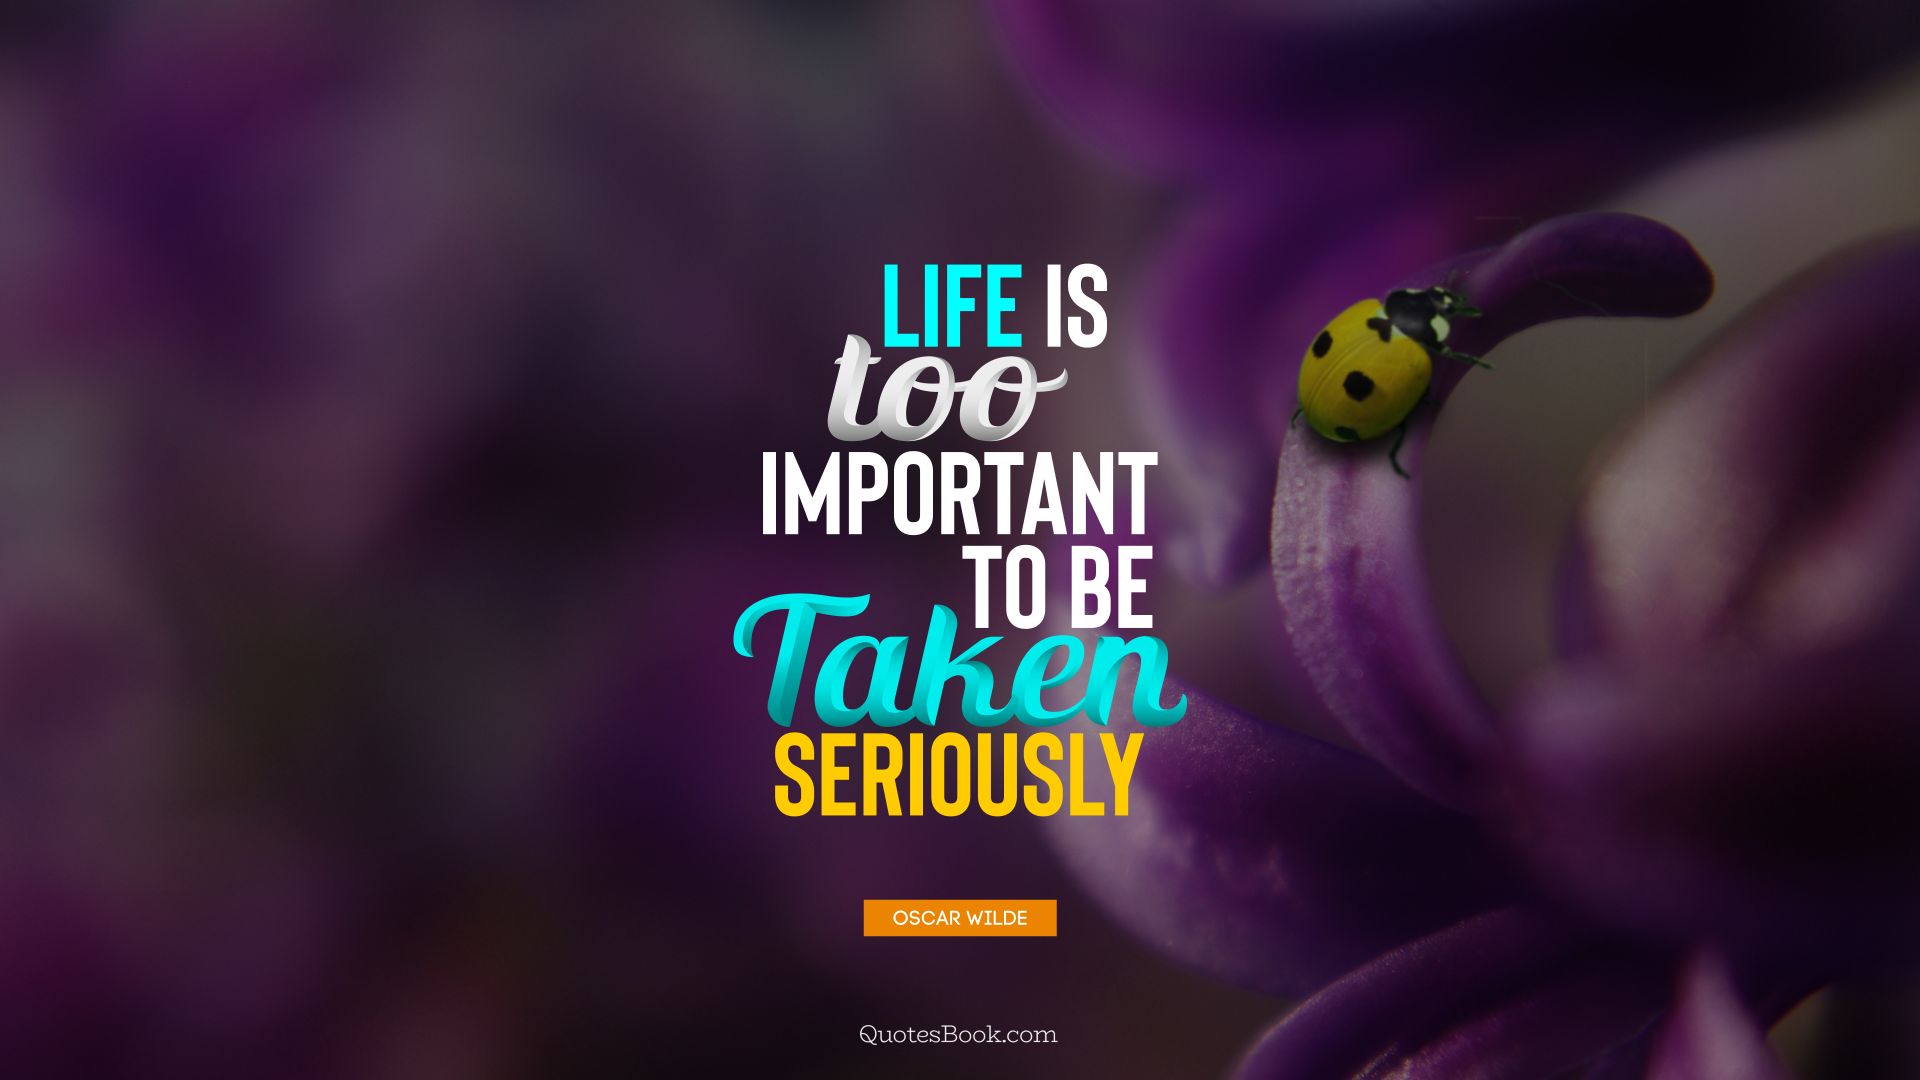 Life is too important to be taken seriously. - Quote by Oscar Wilde